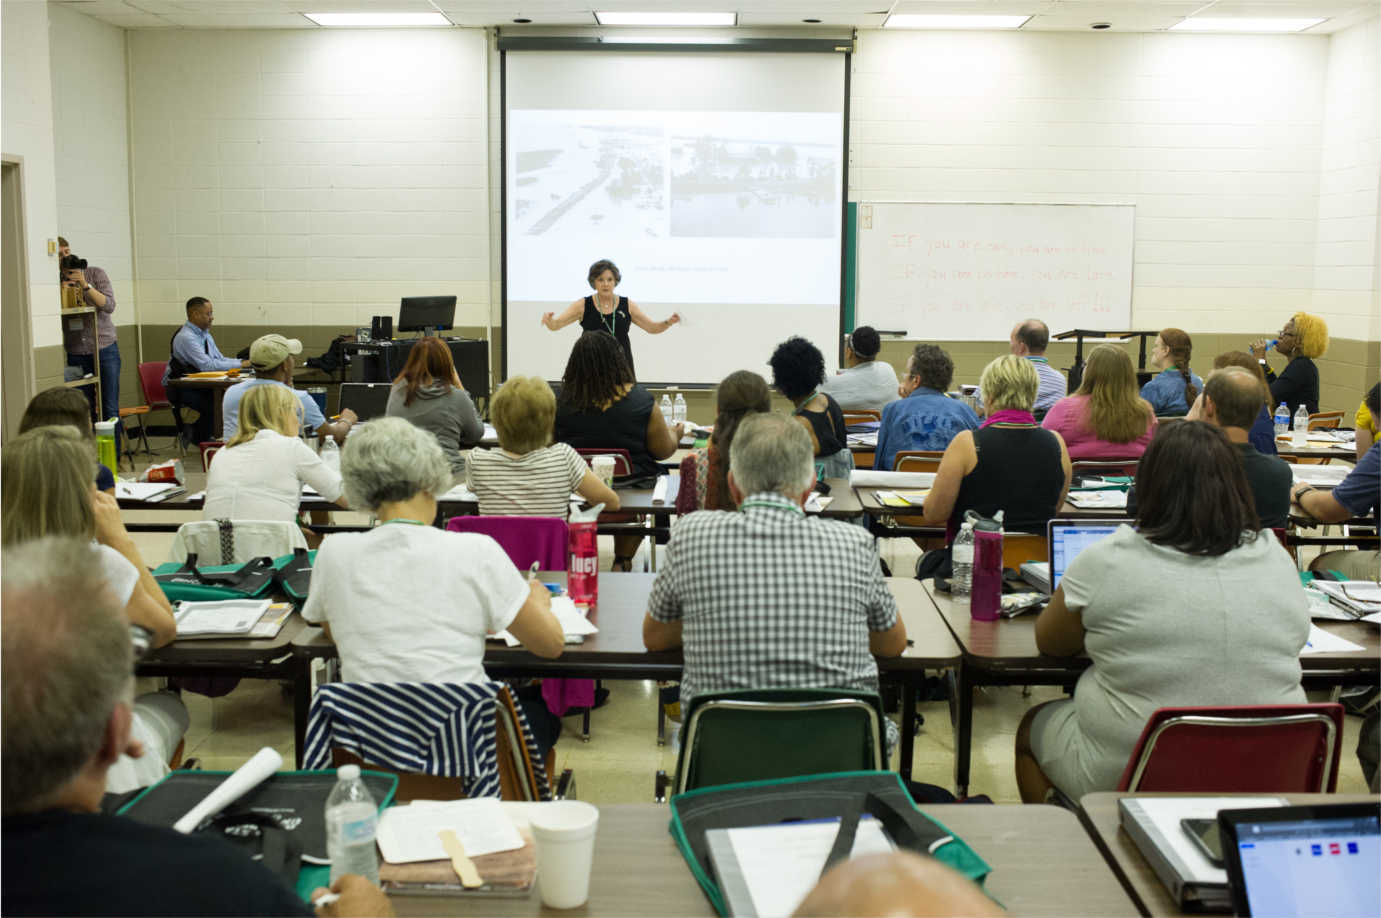 K–12 teachers attend a lecture as part of The Most Southern Place on Earth. Image courtesy of the Delta Center for Culture and Learning at Delta State University.